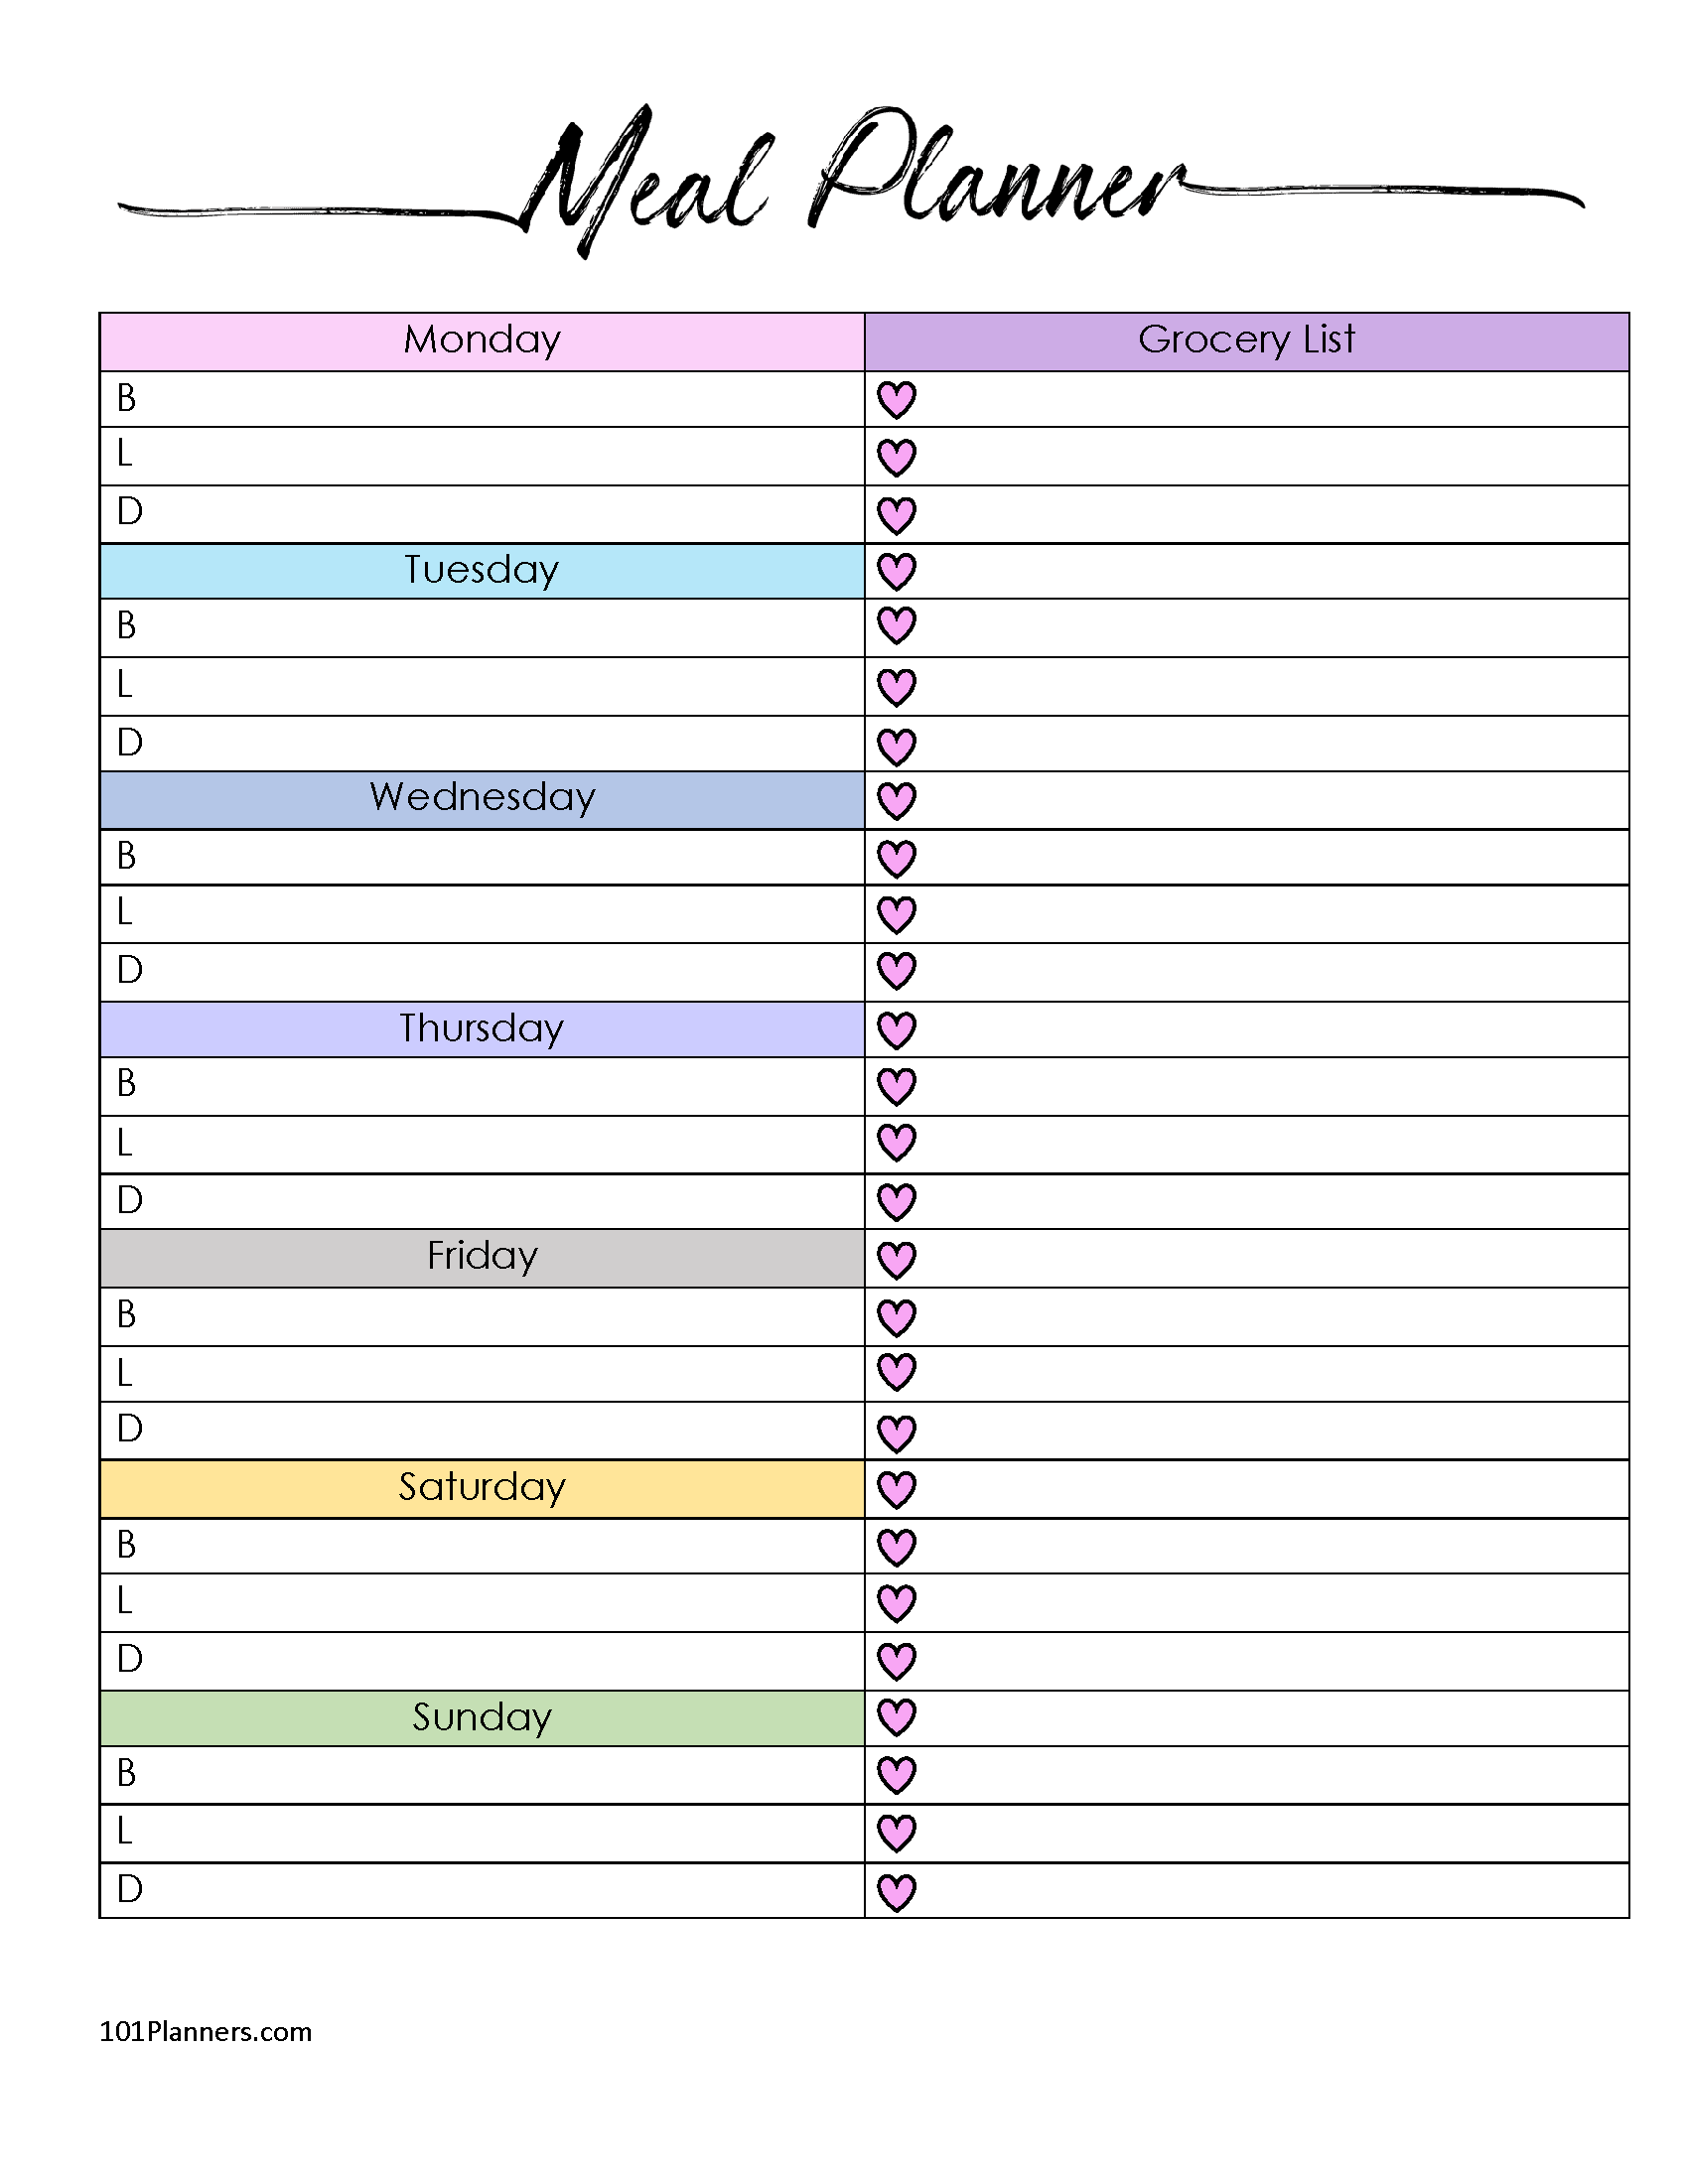 Meal Planning And Grocery List Template from www.101planners.com